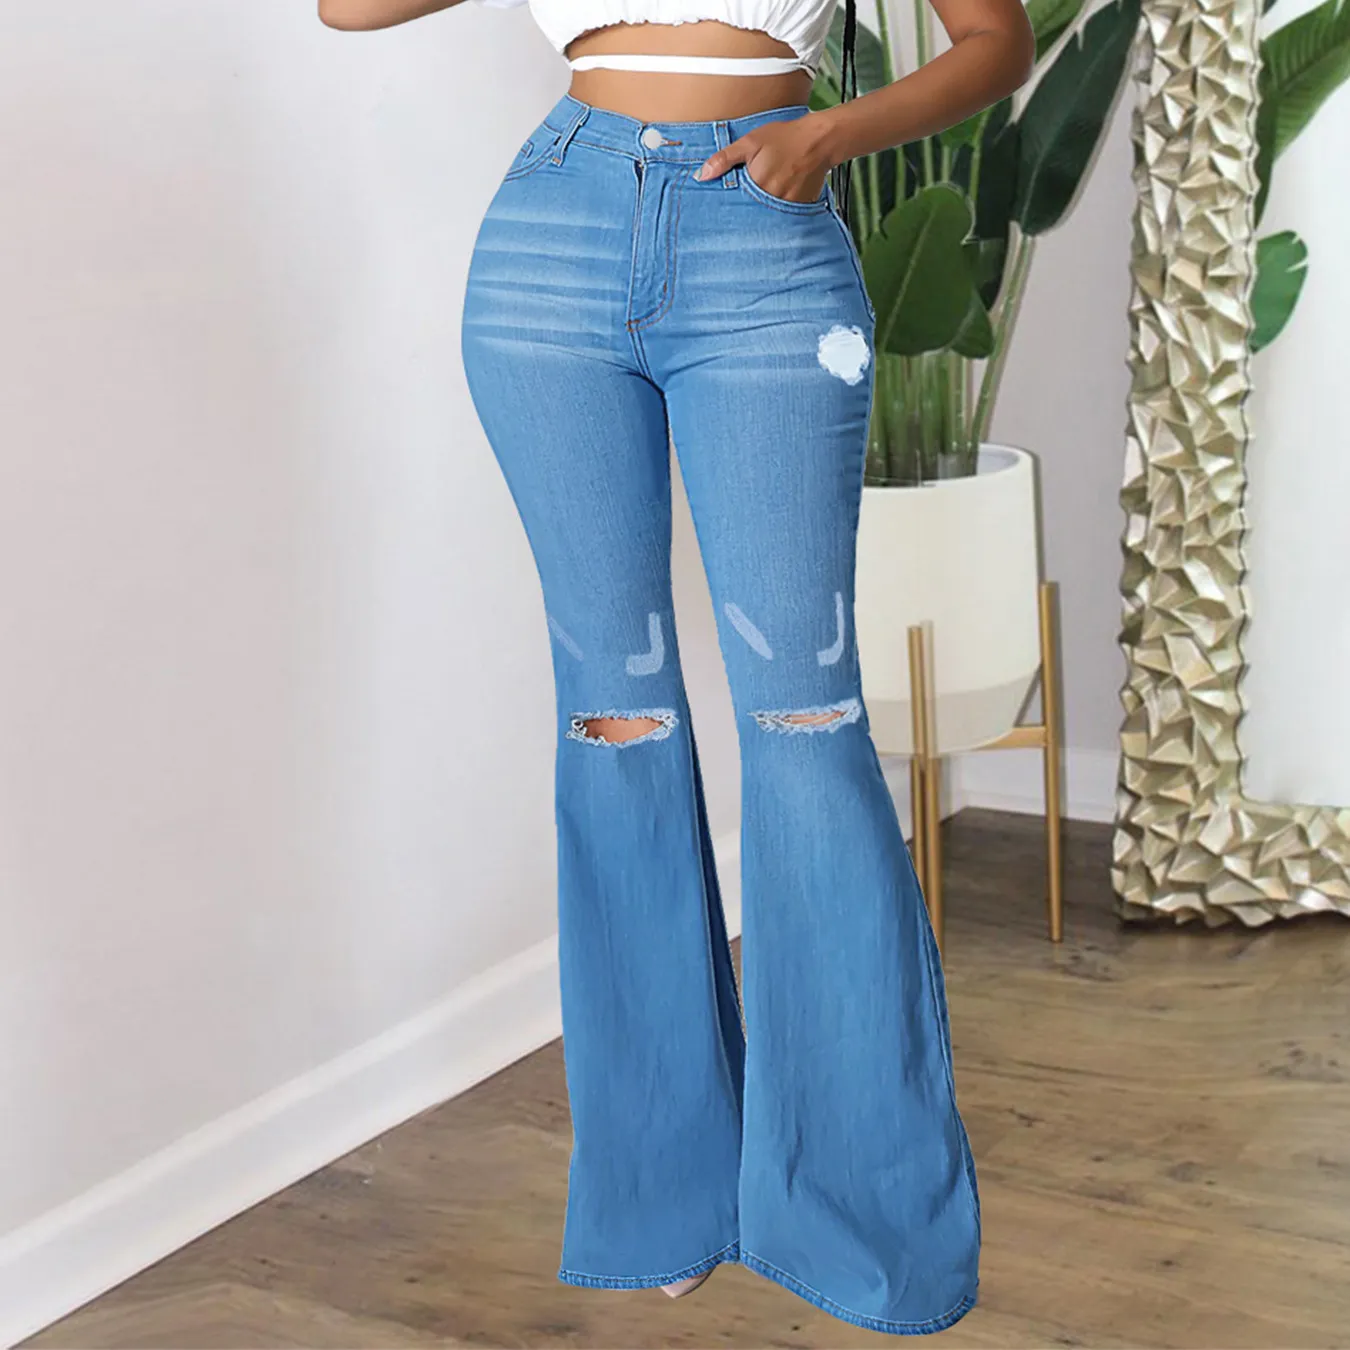 Wholesale Women Elegant Edgy Ripped Flared Jeans